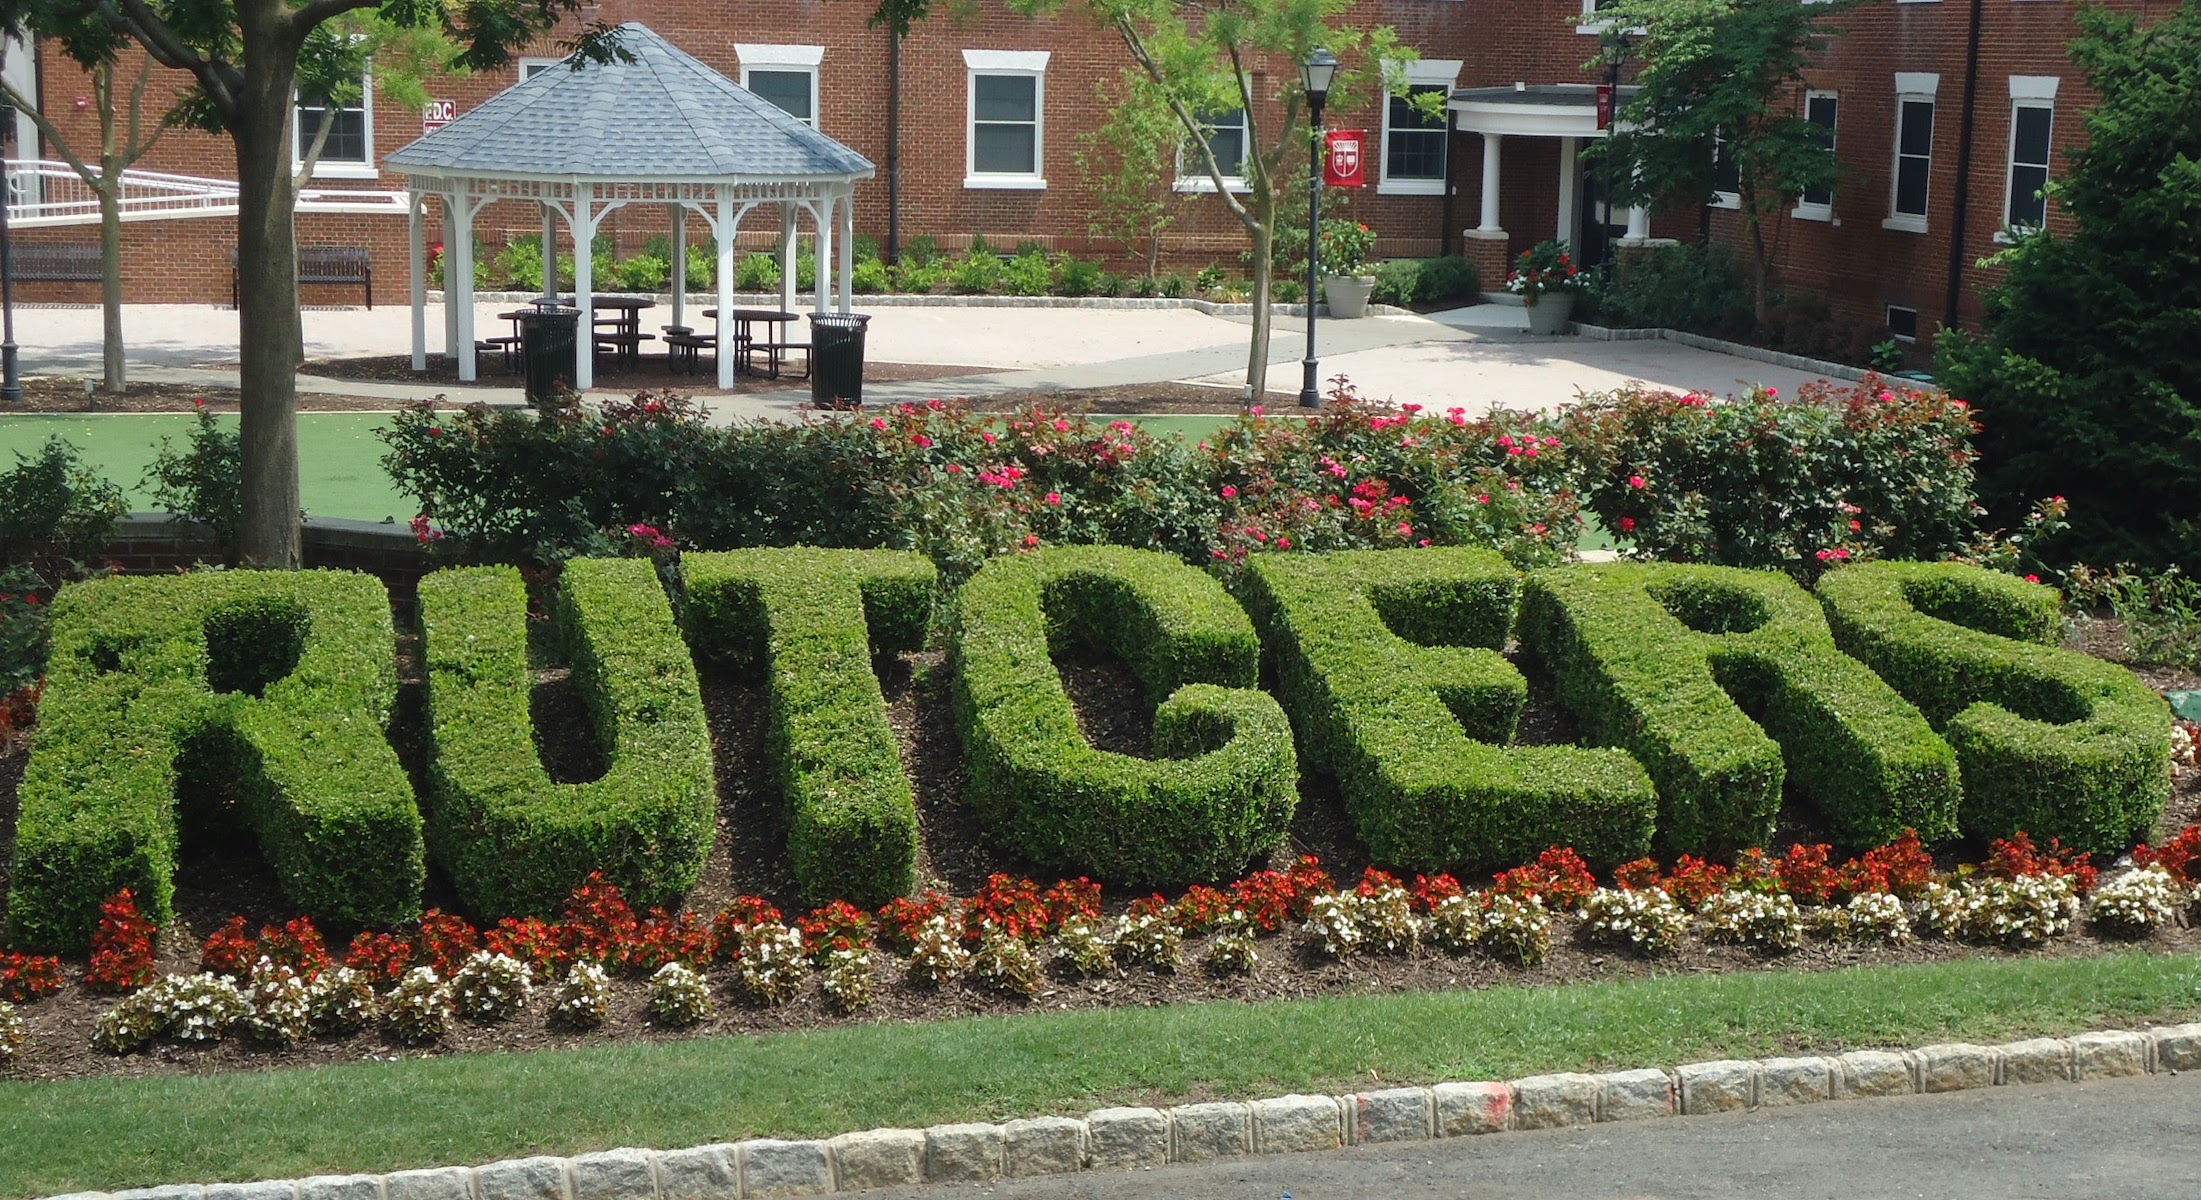 A hedge outside Rutgers University in New Brunswick, New Jersey, July 30, 2016. (Tomwsulcer via Creative Commons)